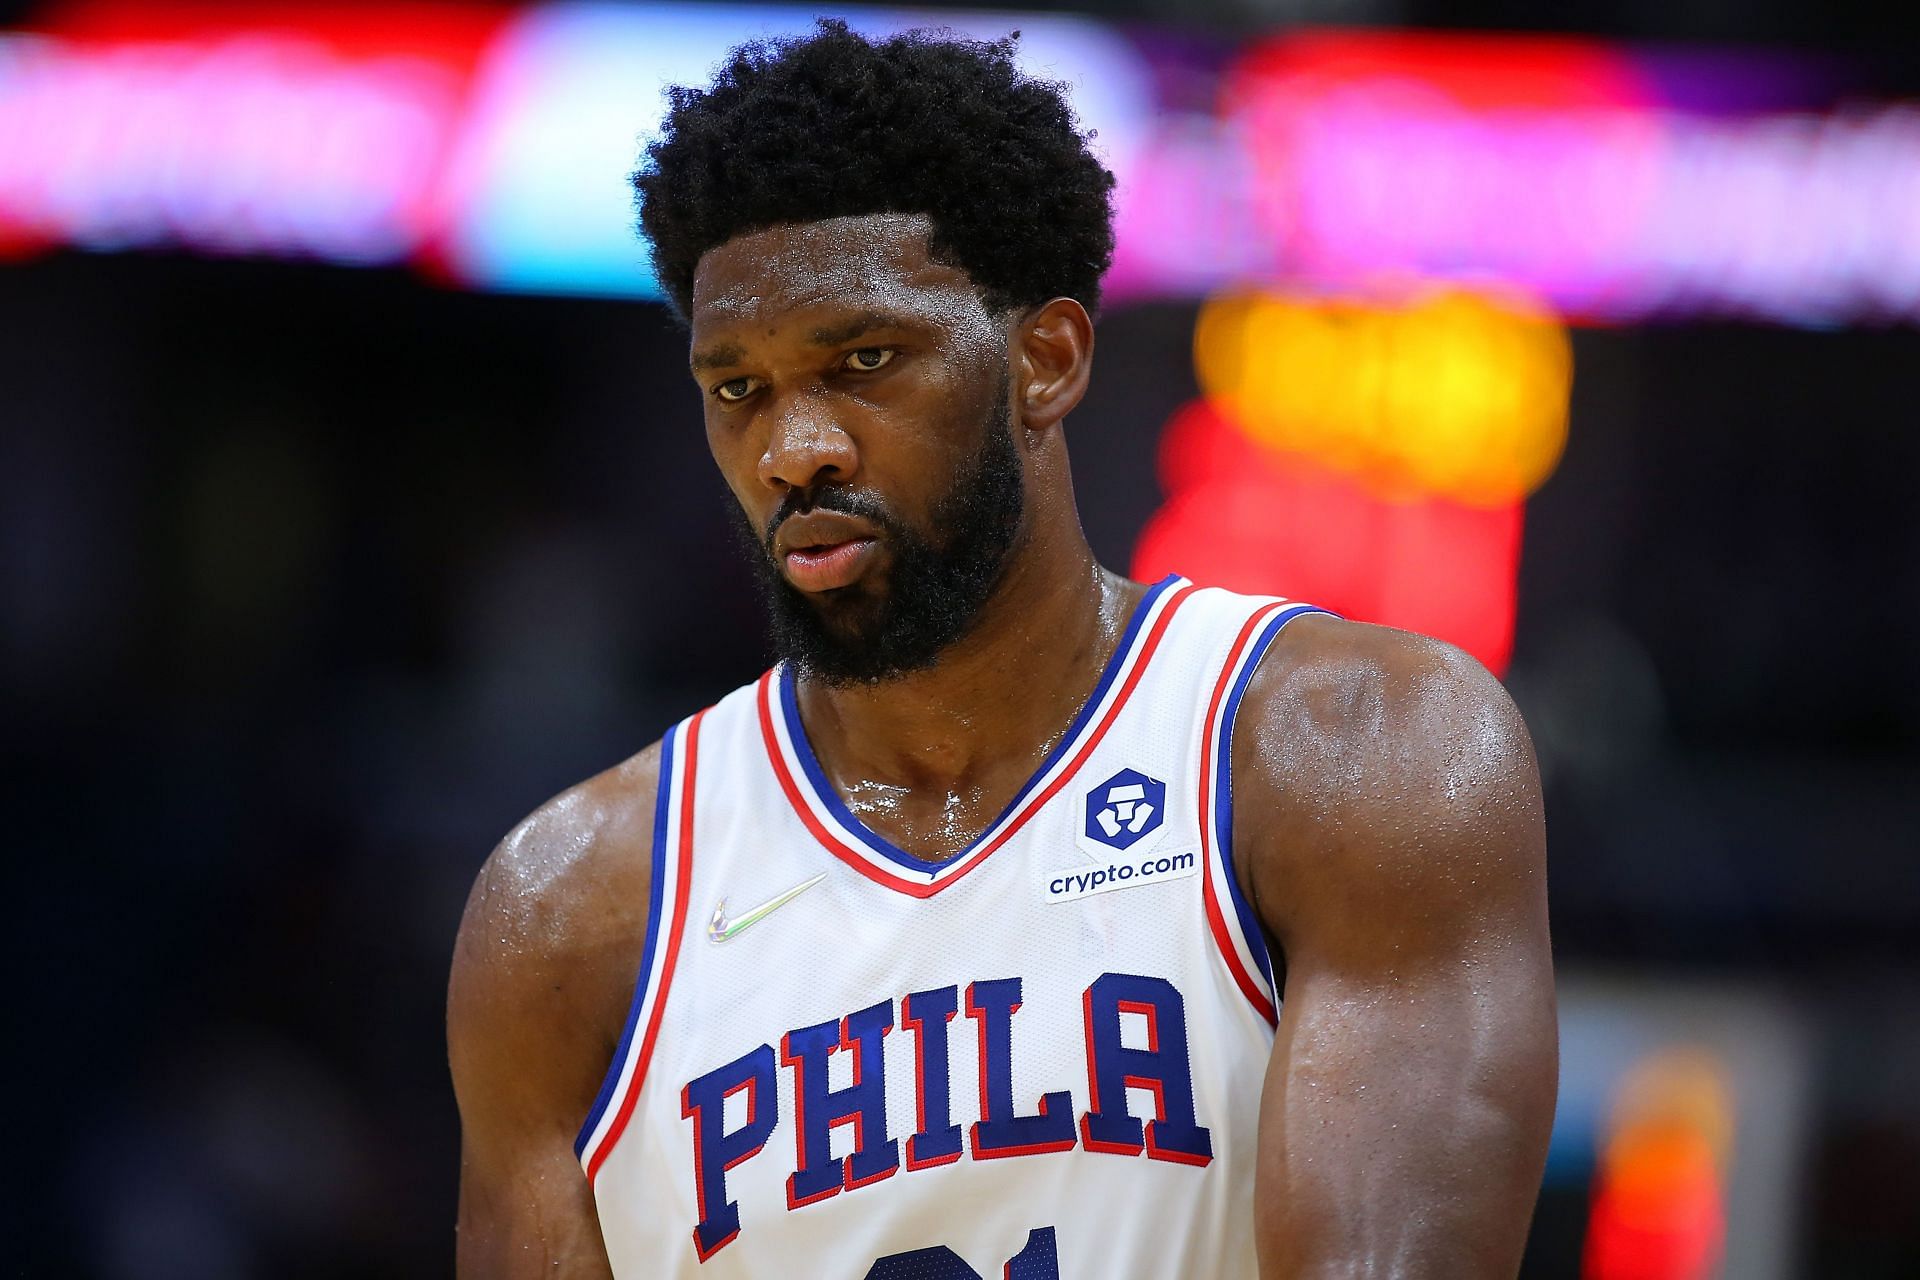 Philadelphia 76ers star Joel Embiid has not fully recovered from a knee problem